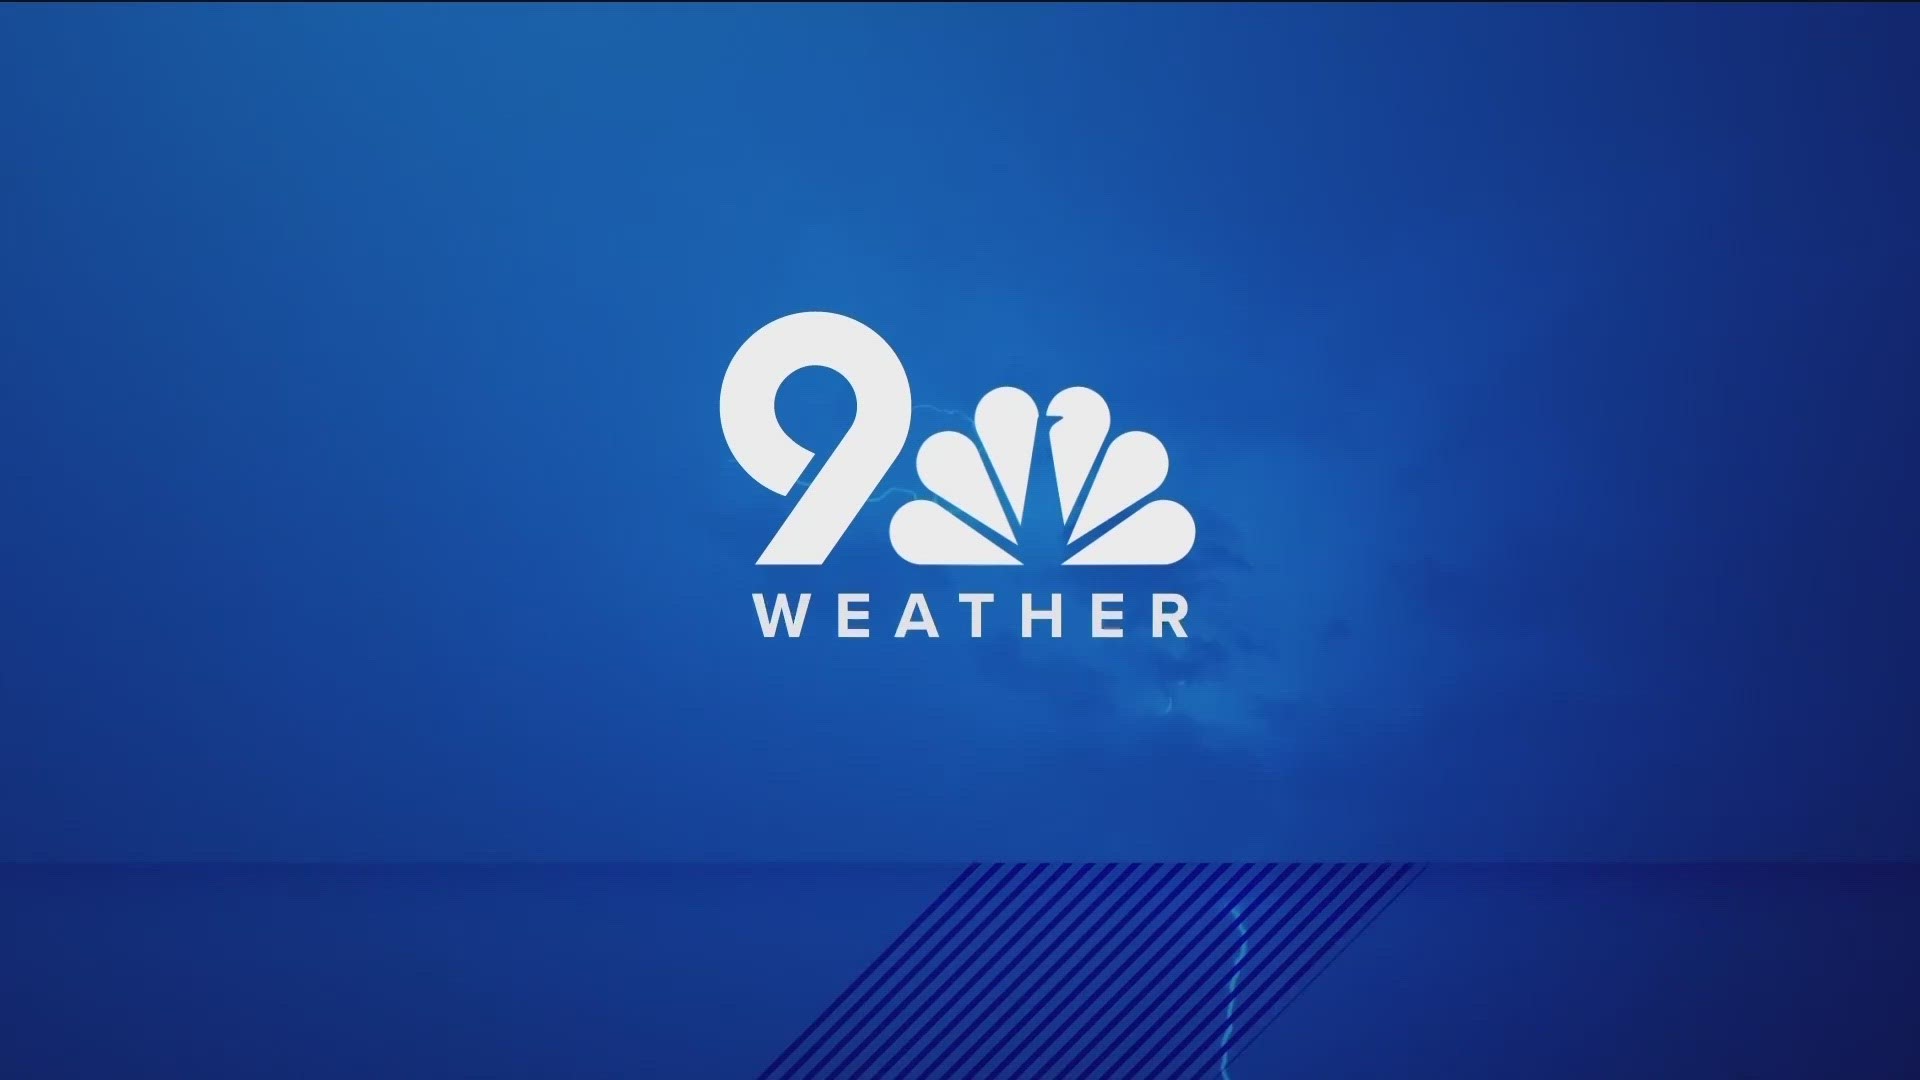 9NEWS Meteorologist Keely Chalmers is here with the forecast of how much snow some may see, and a look at the weekend weather.